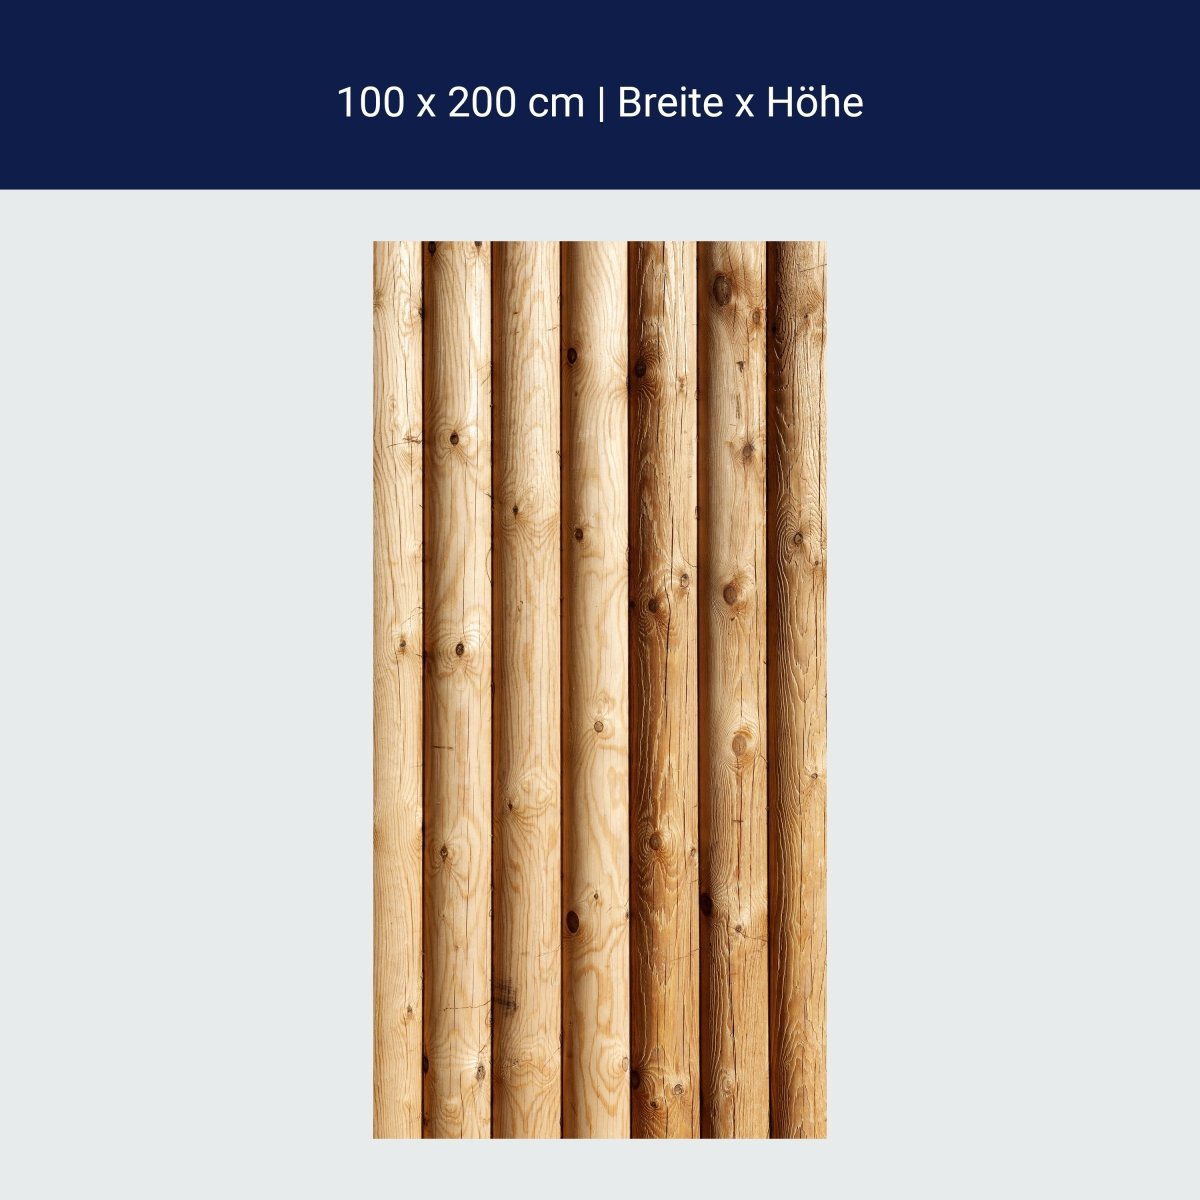 Shower wall rustic wooden wall M0704